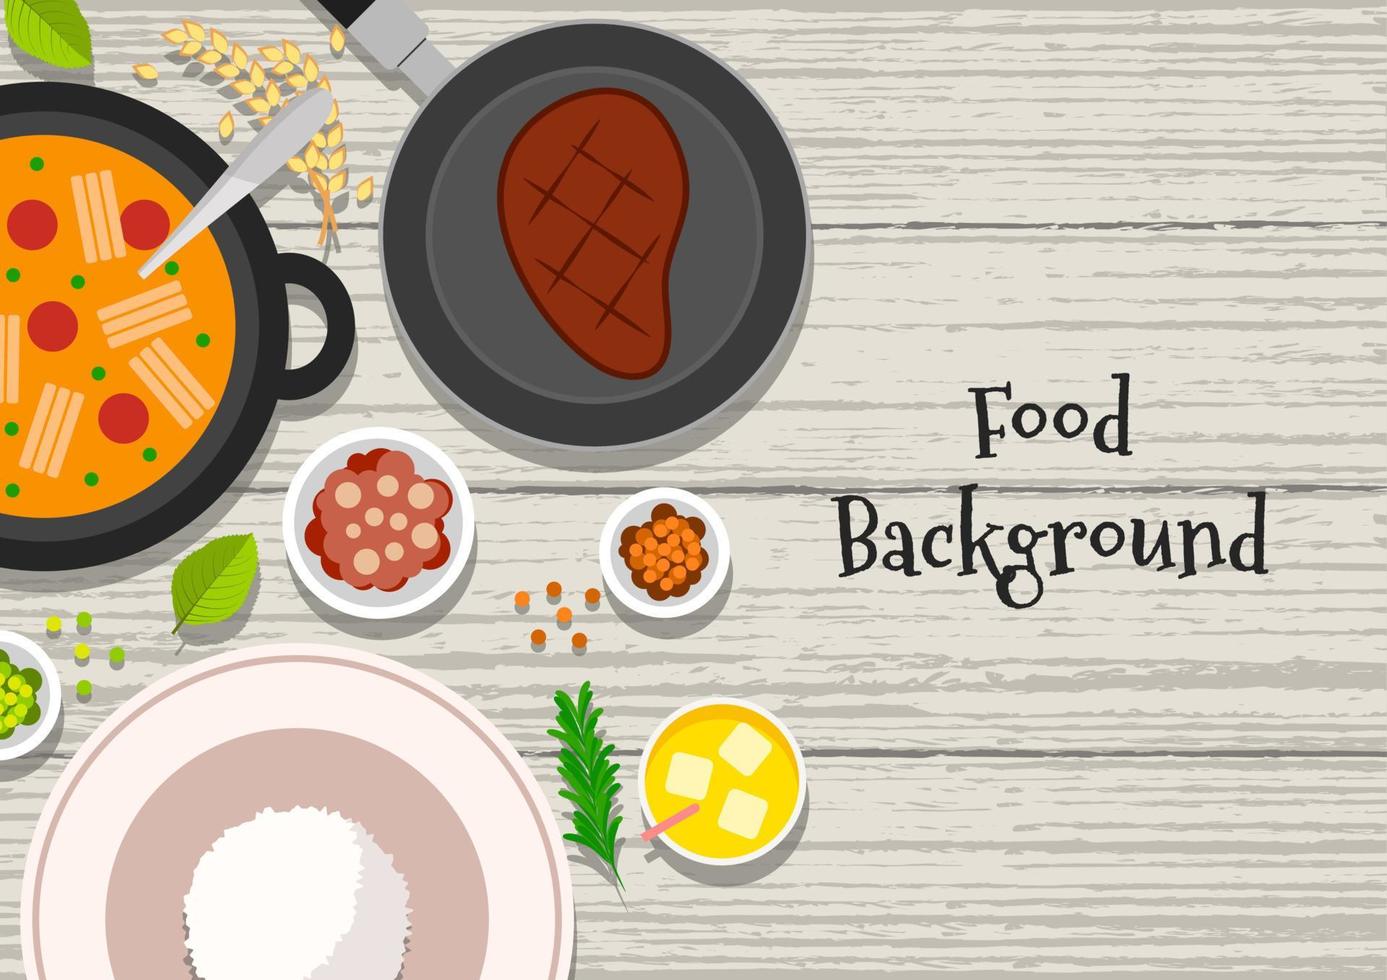 Food vector illustration. Background of food dishes. Food on a wooden table